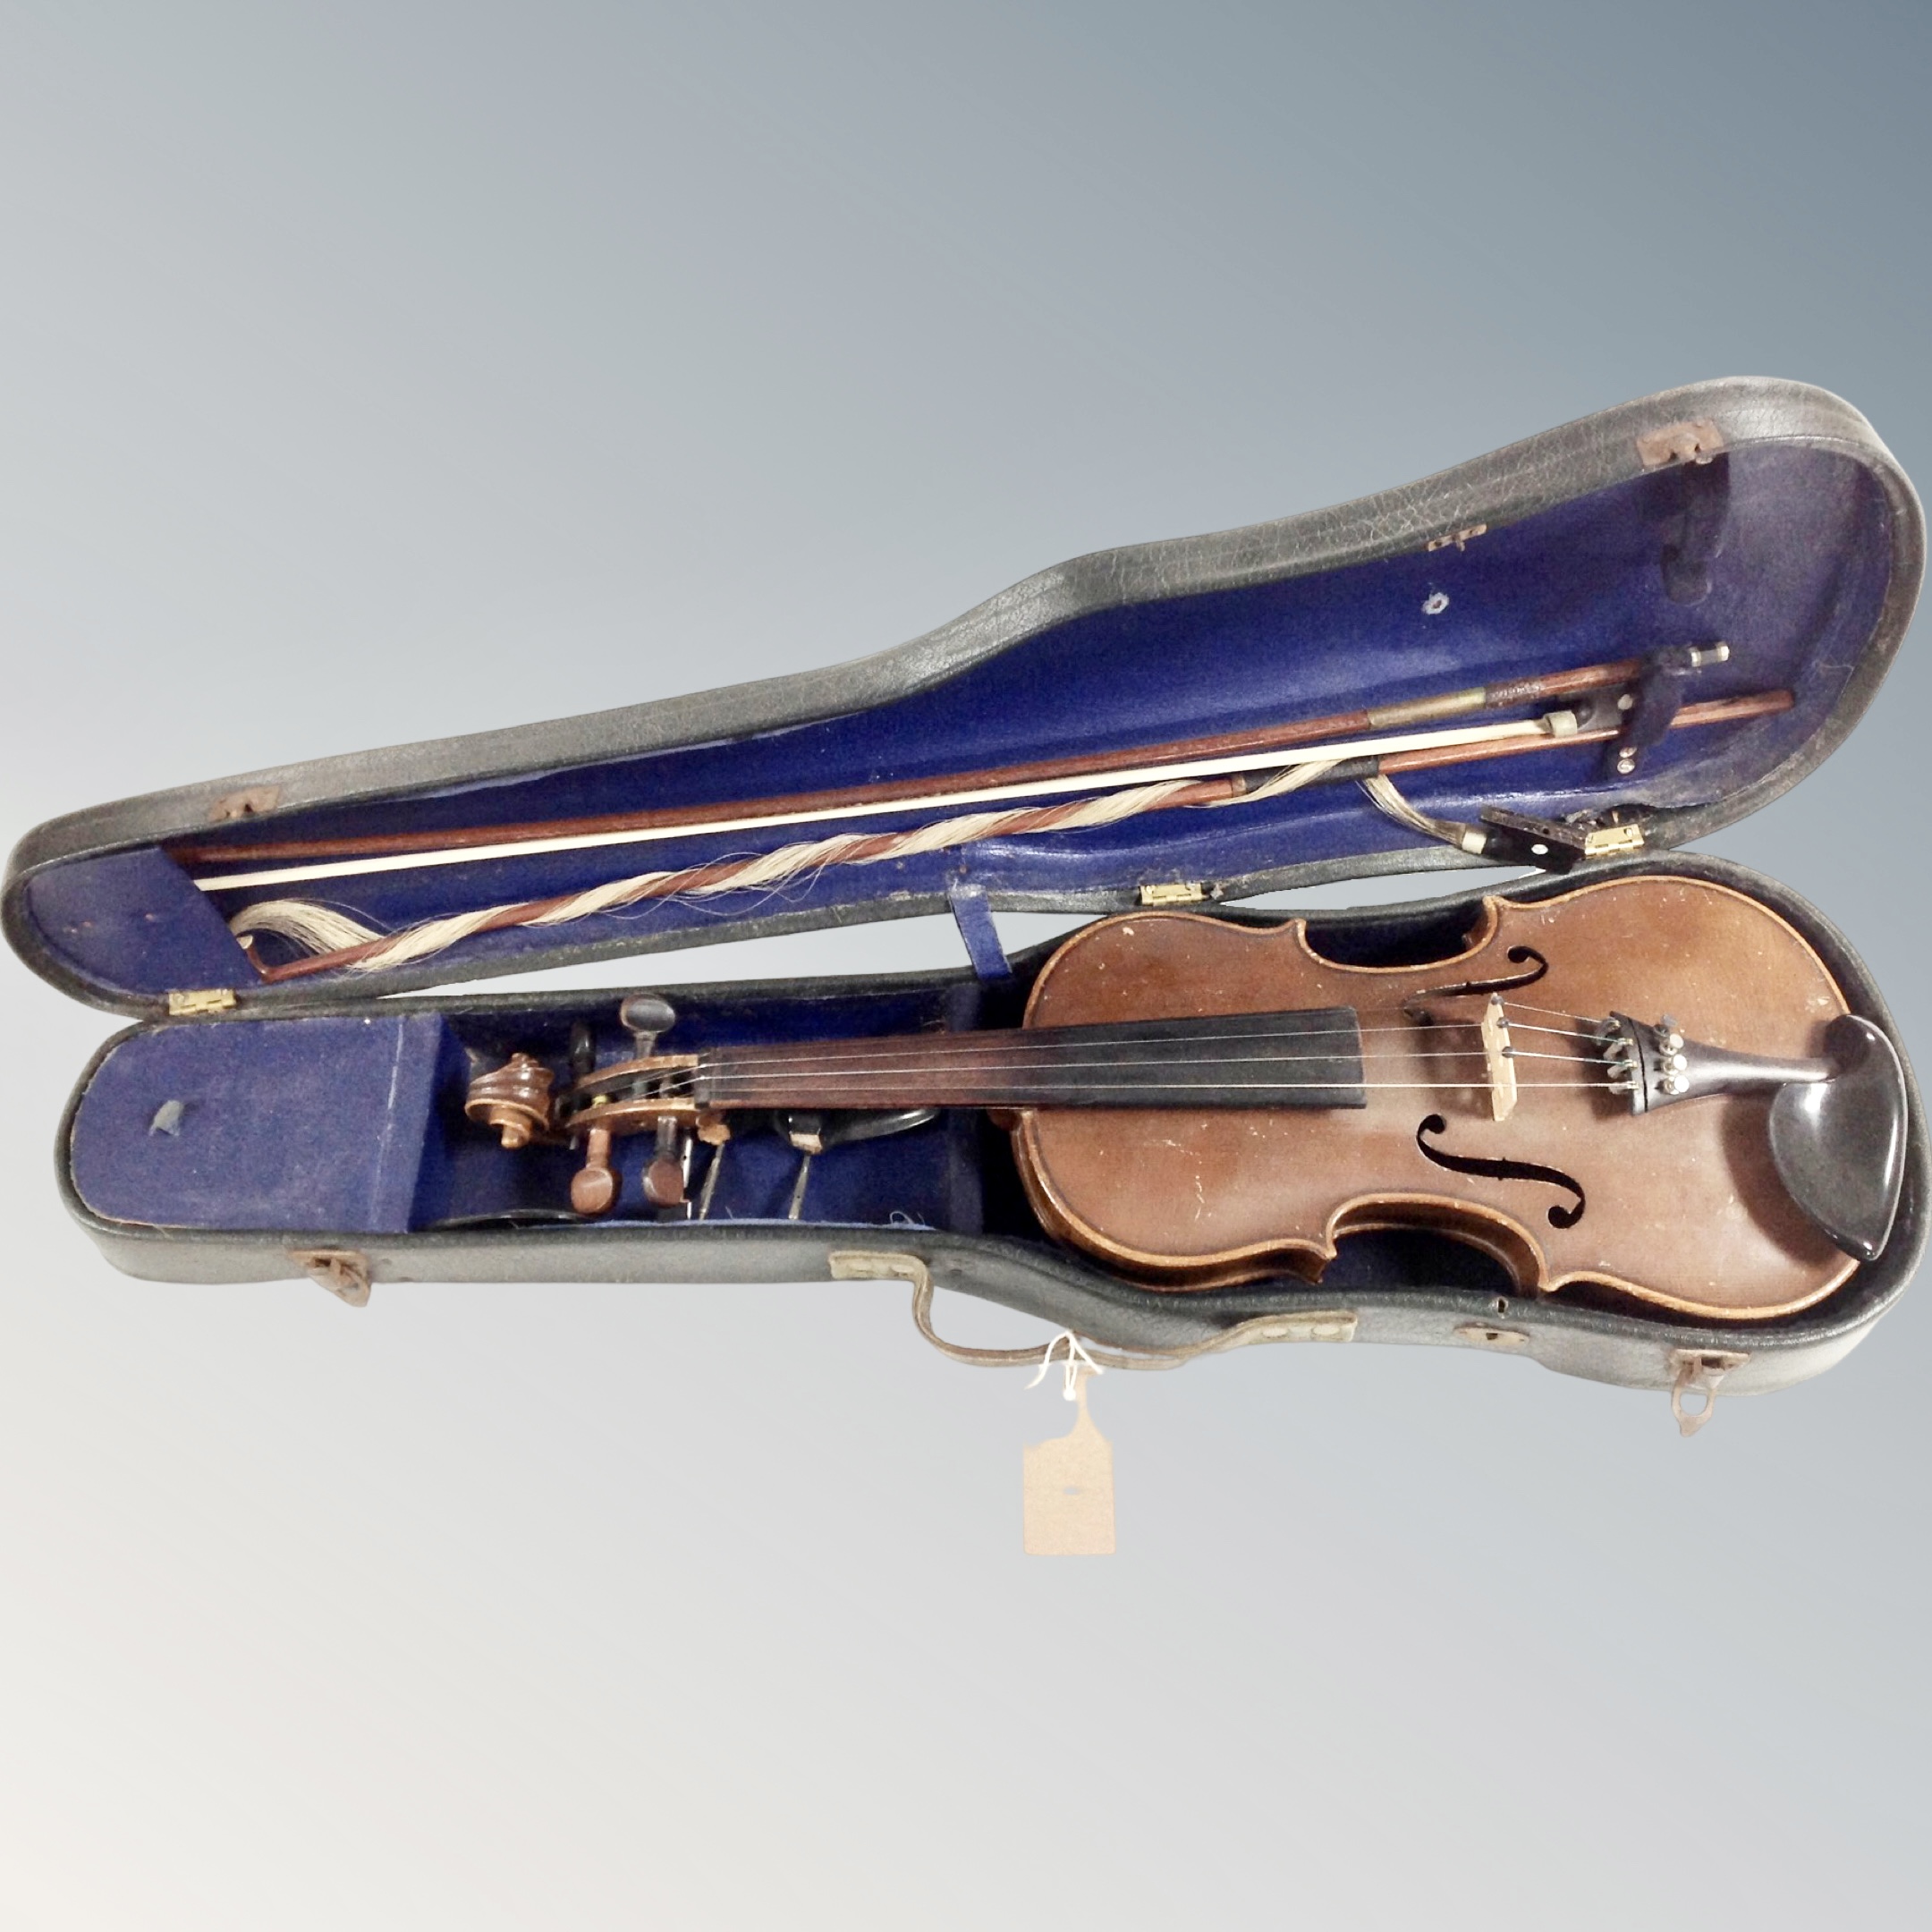 An antique violin with two bows in coffin case